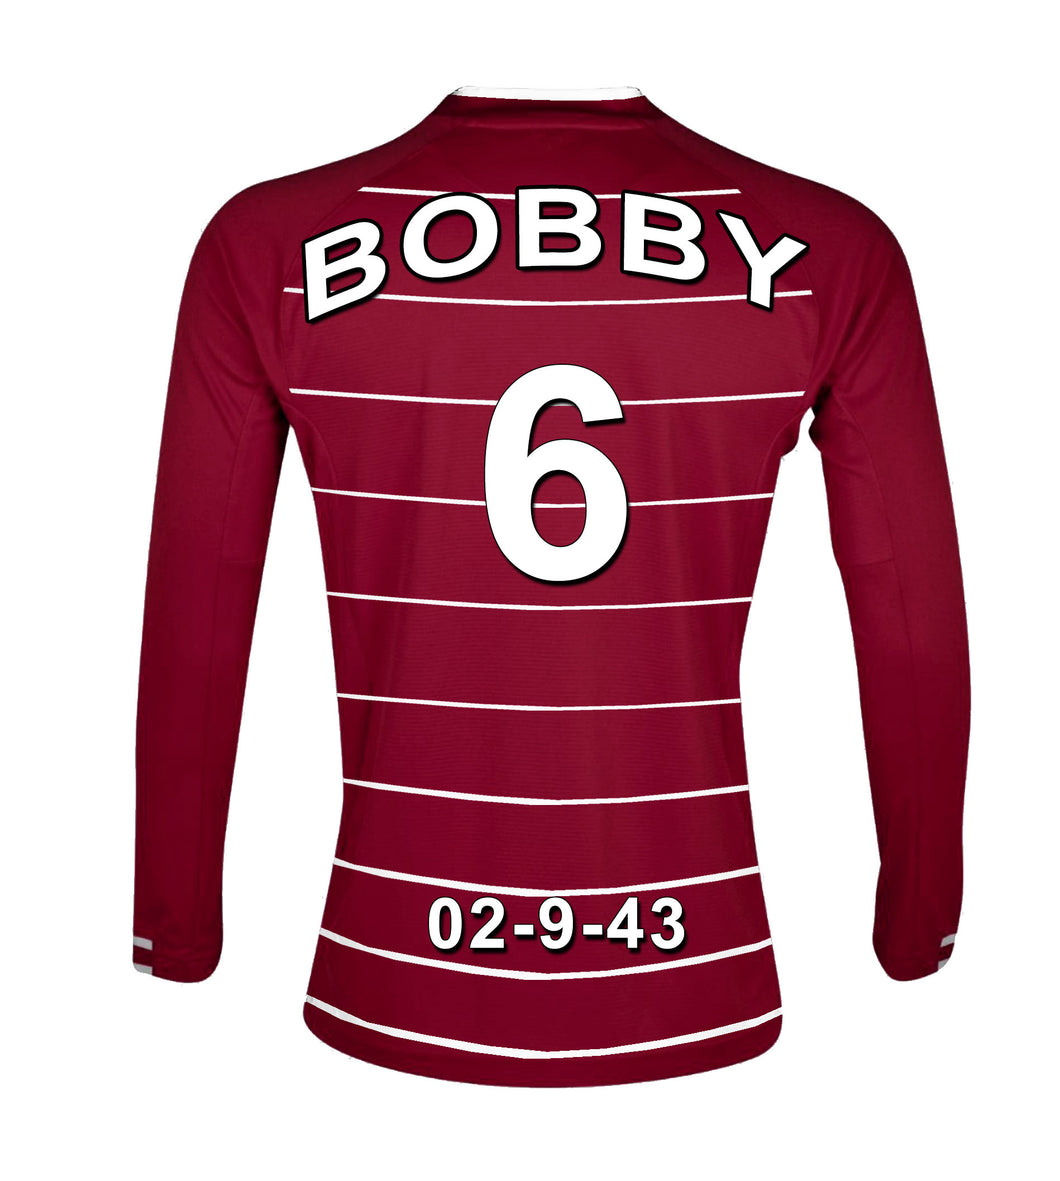 West Ham  claret and white personalised football shirt canvas